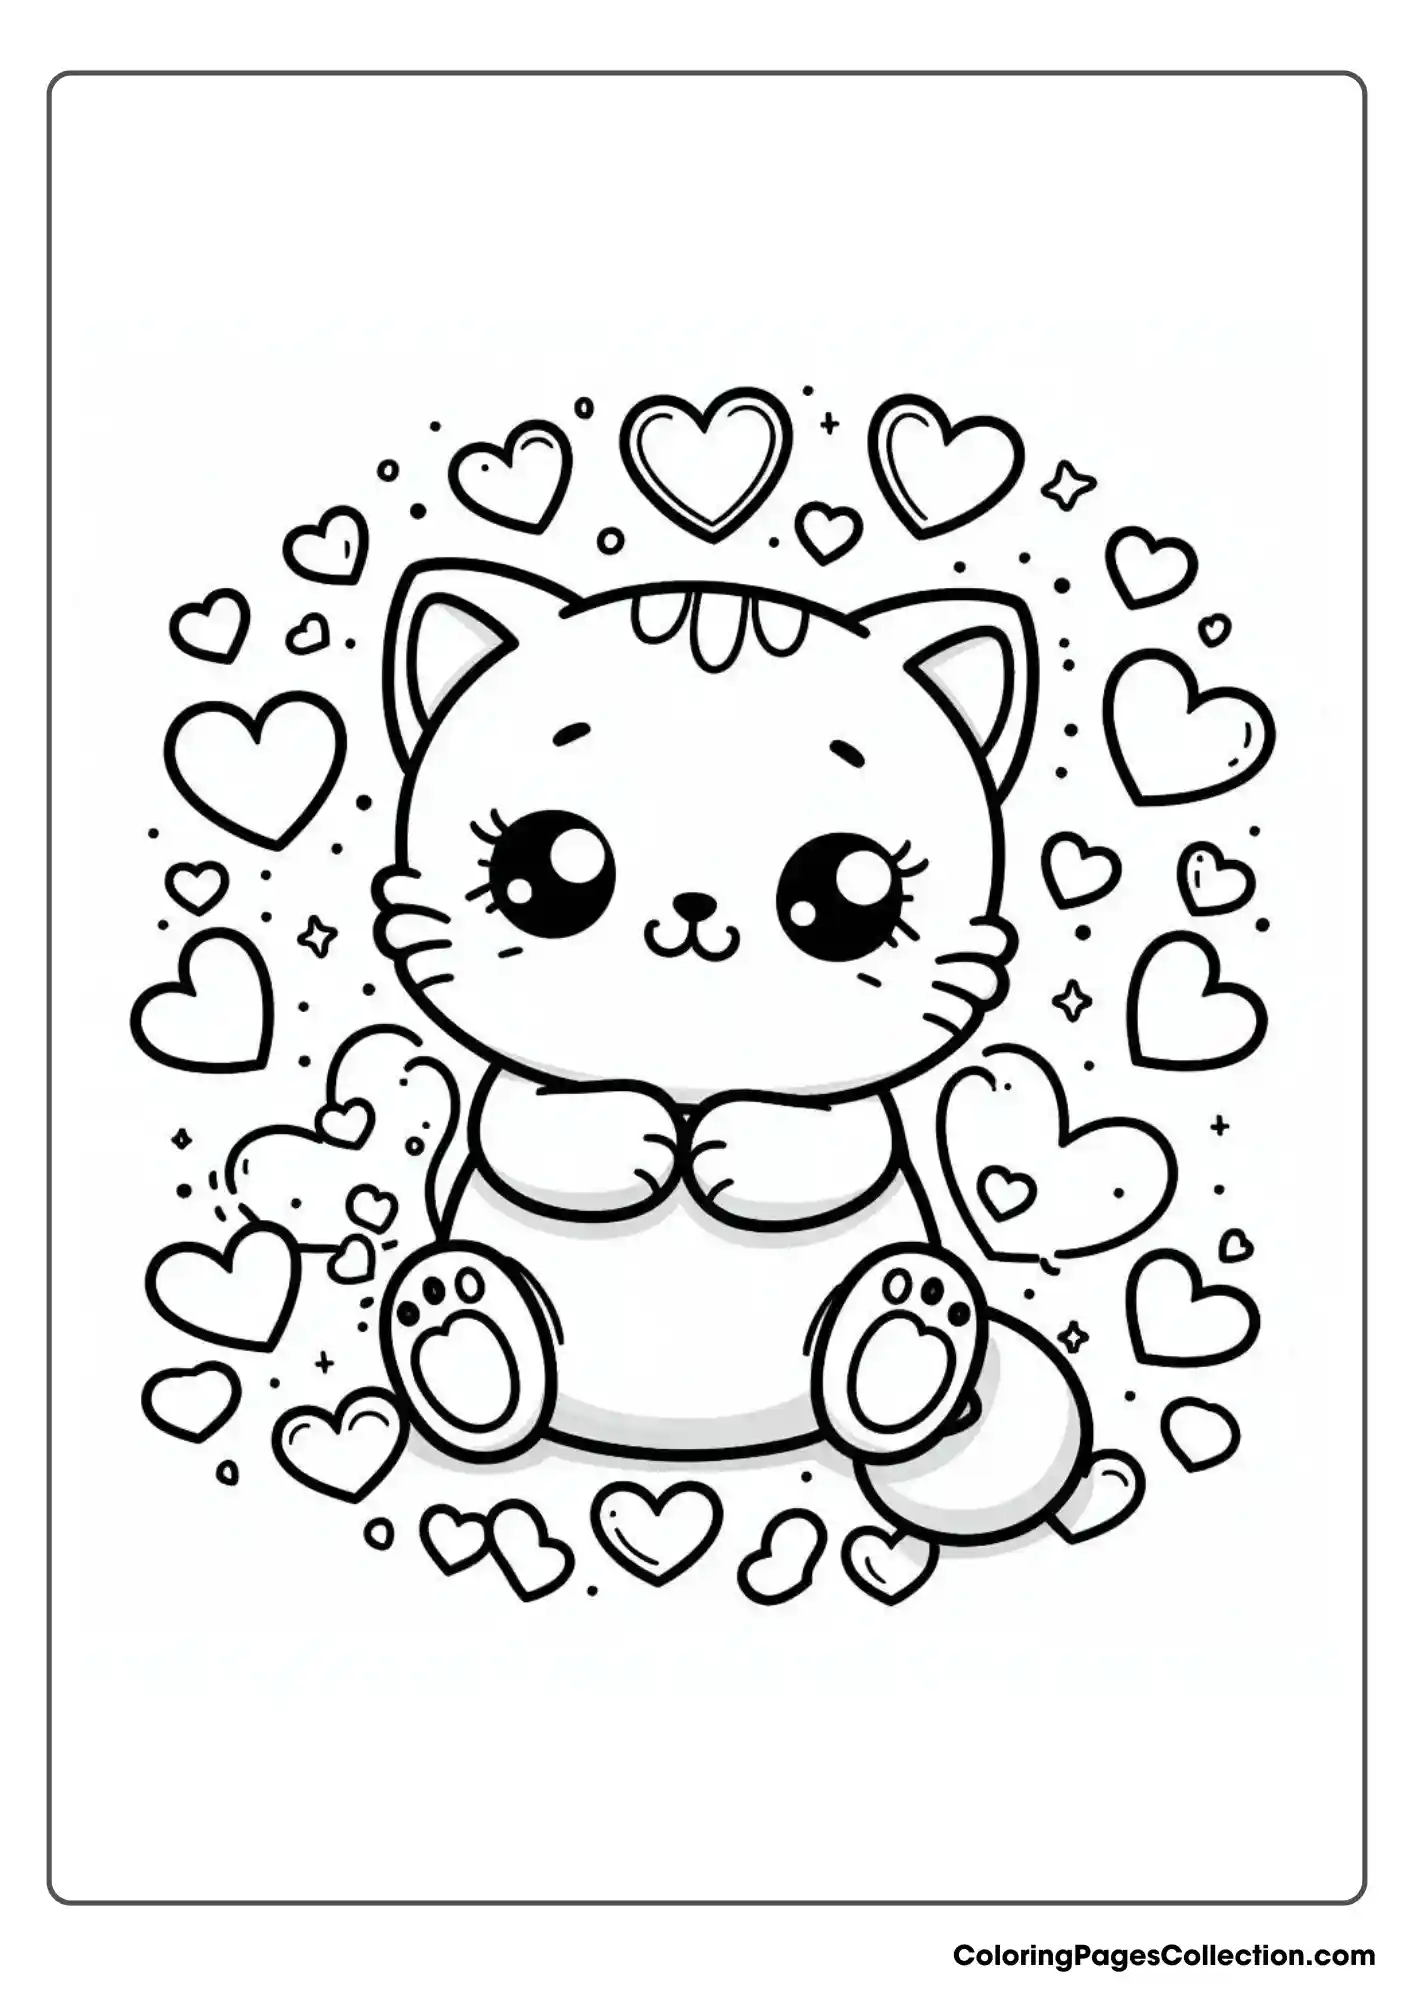 A Cute Cat Is Surrounded By Hearts